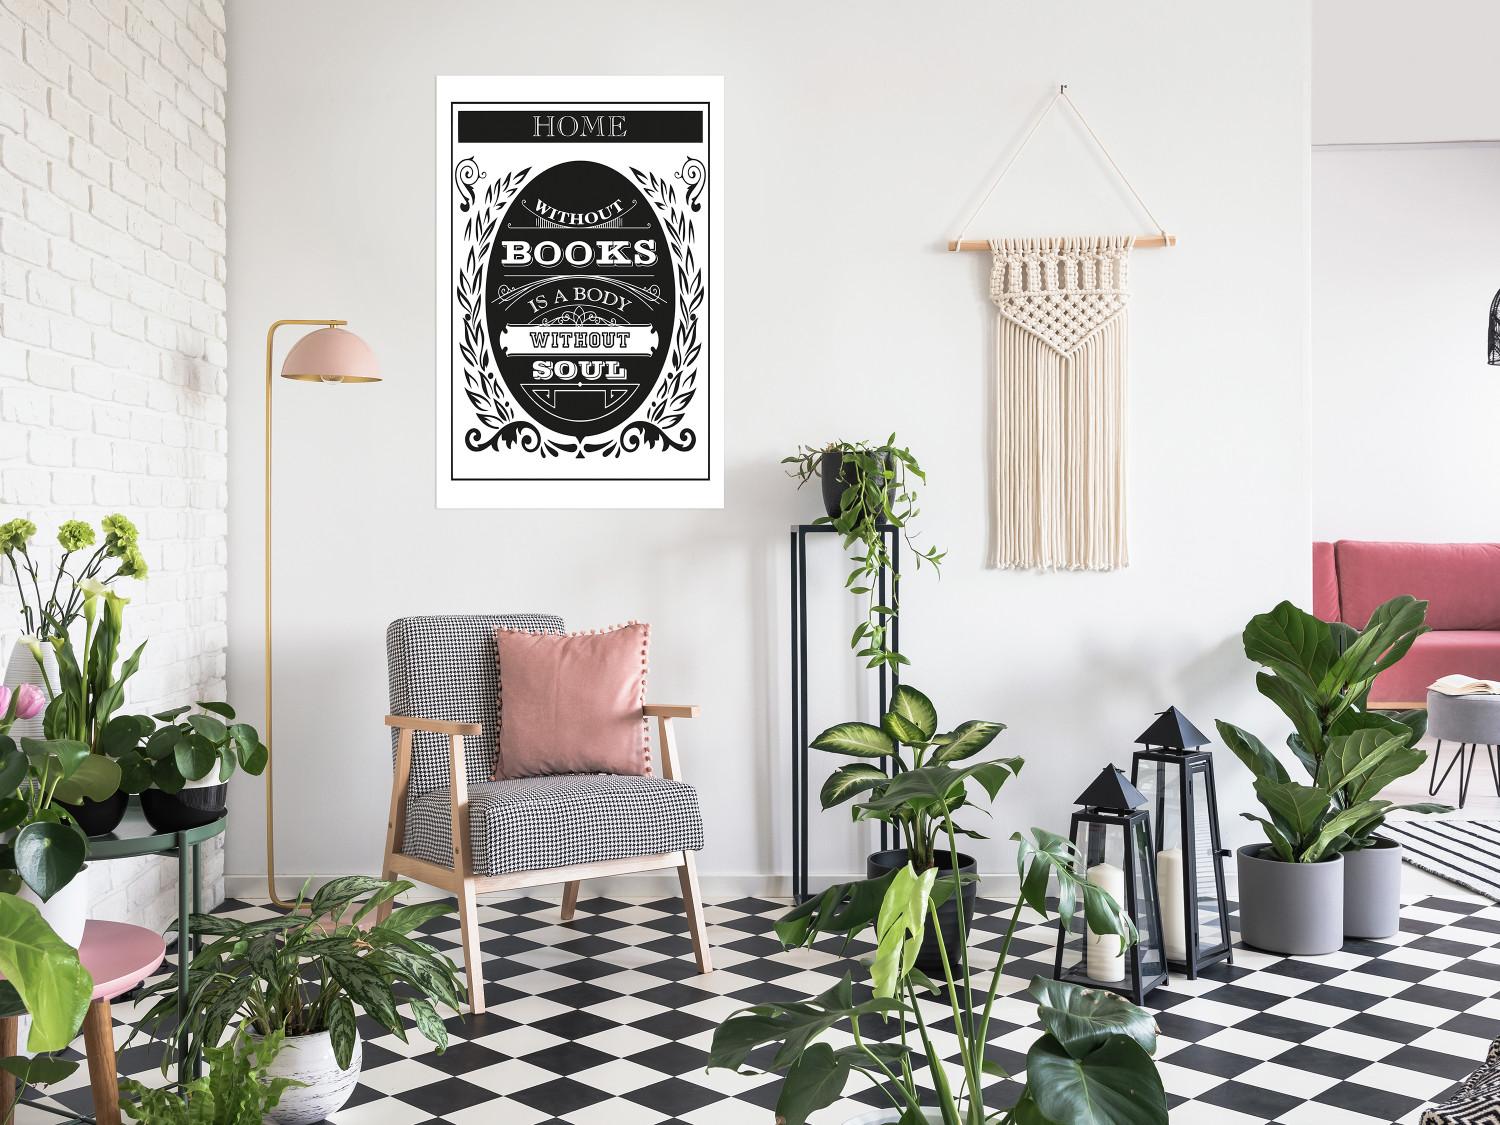 Póster Home Without Books is a Body Without Soul [Poster]